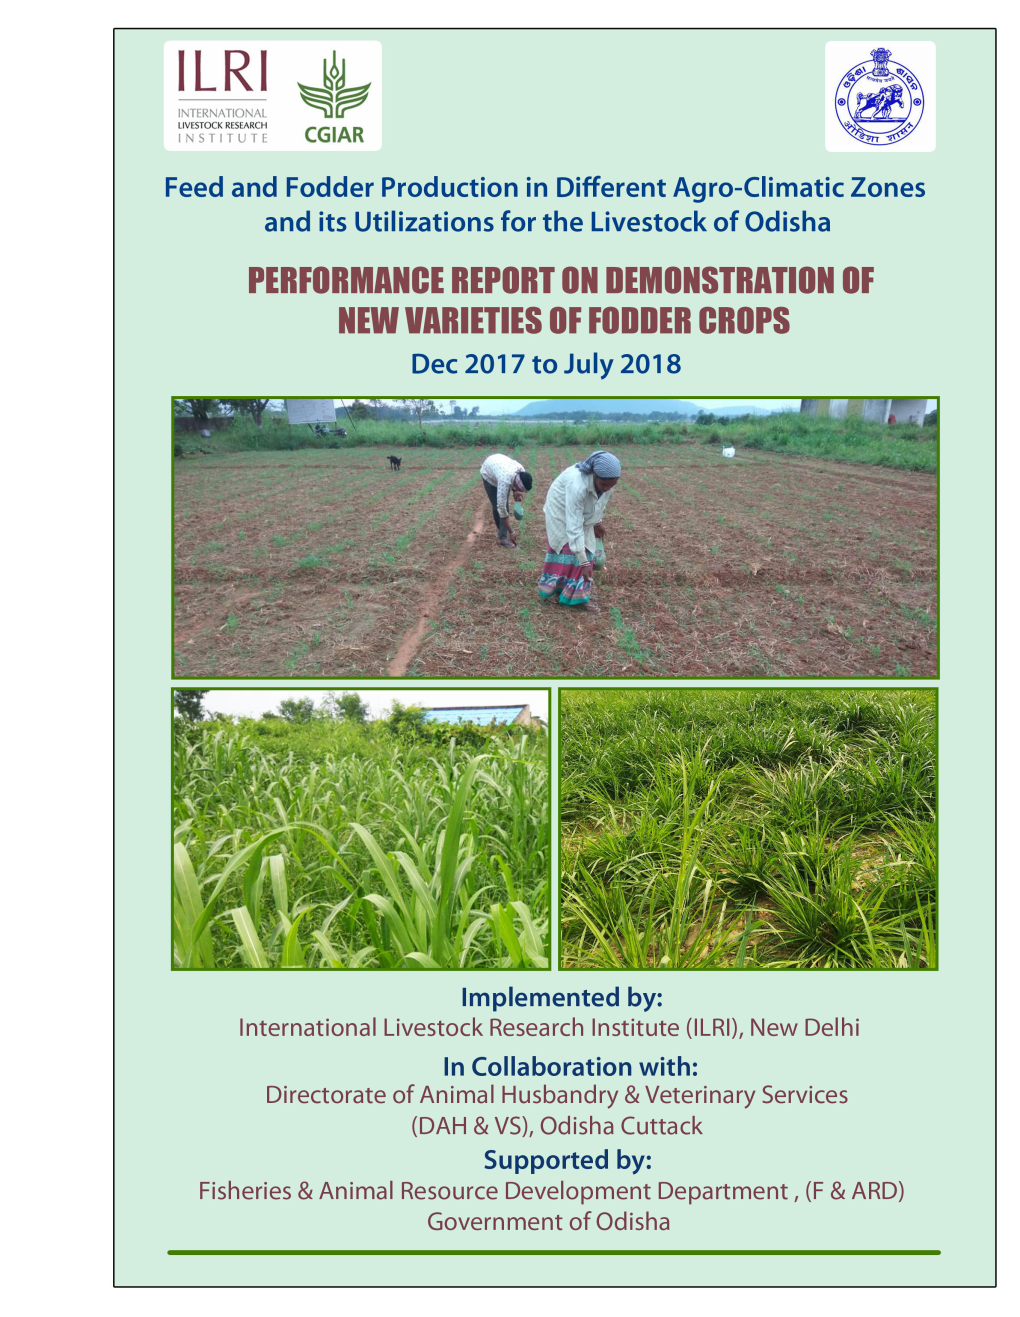 Feed and Fodder Production in Different Agro-Climatic Zones and Its Utilization for Livestock of Odisha